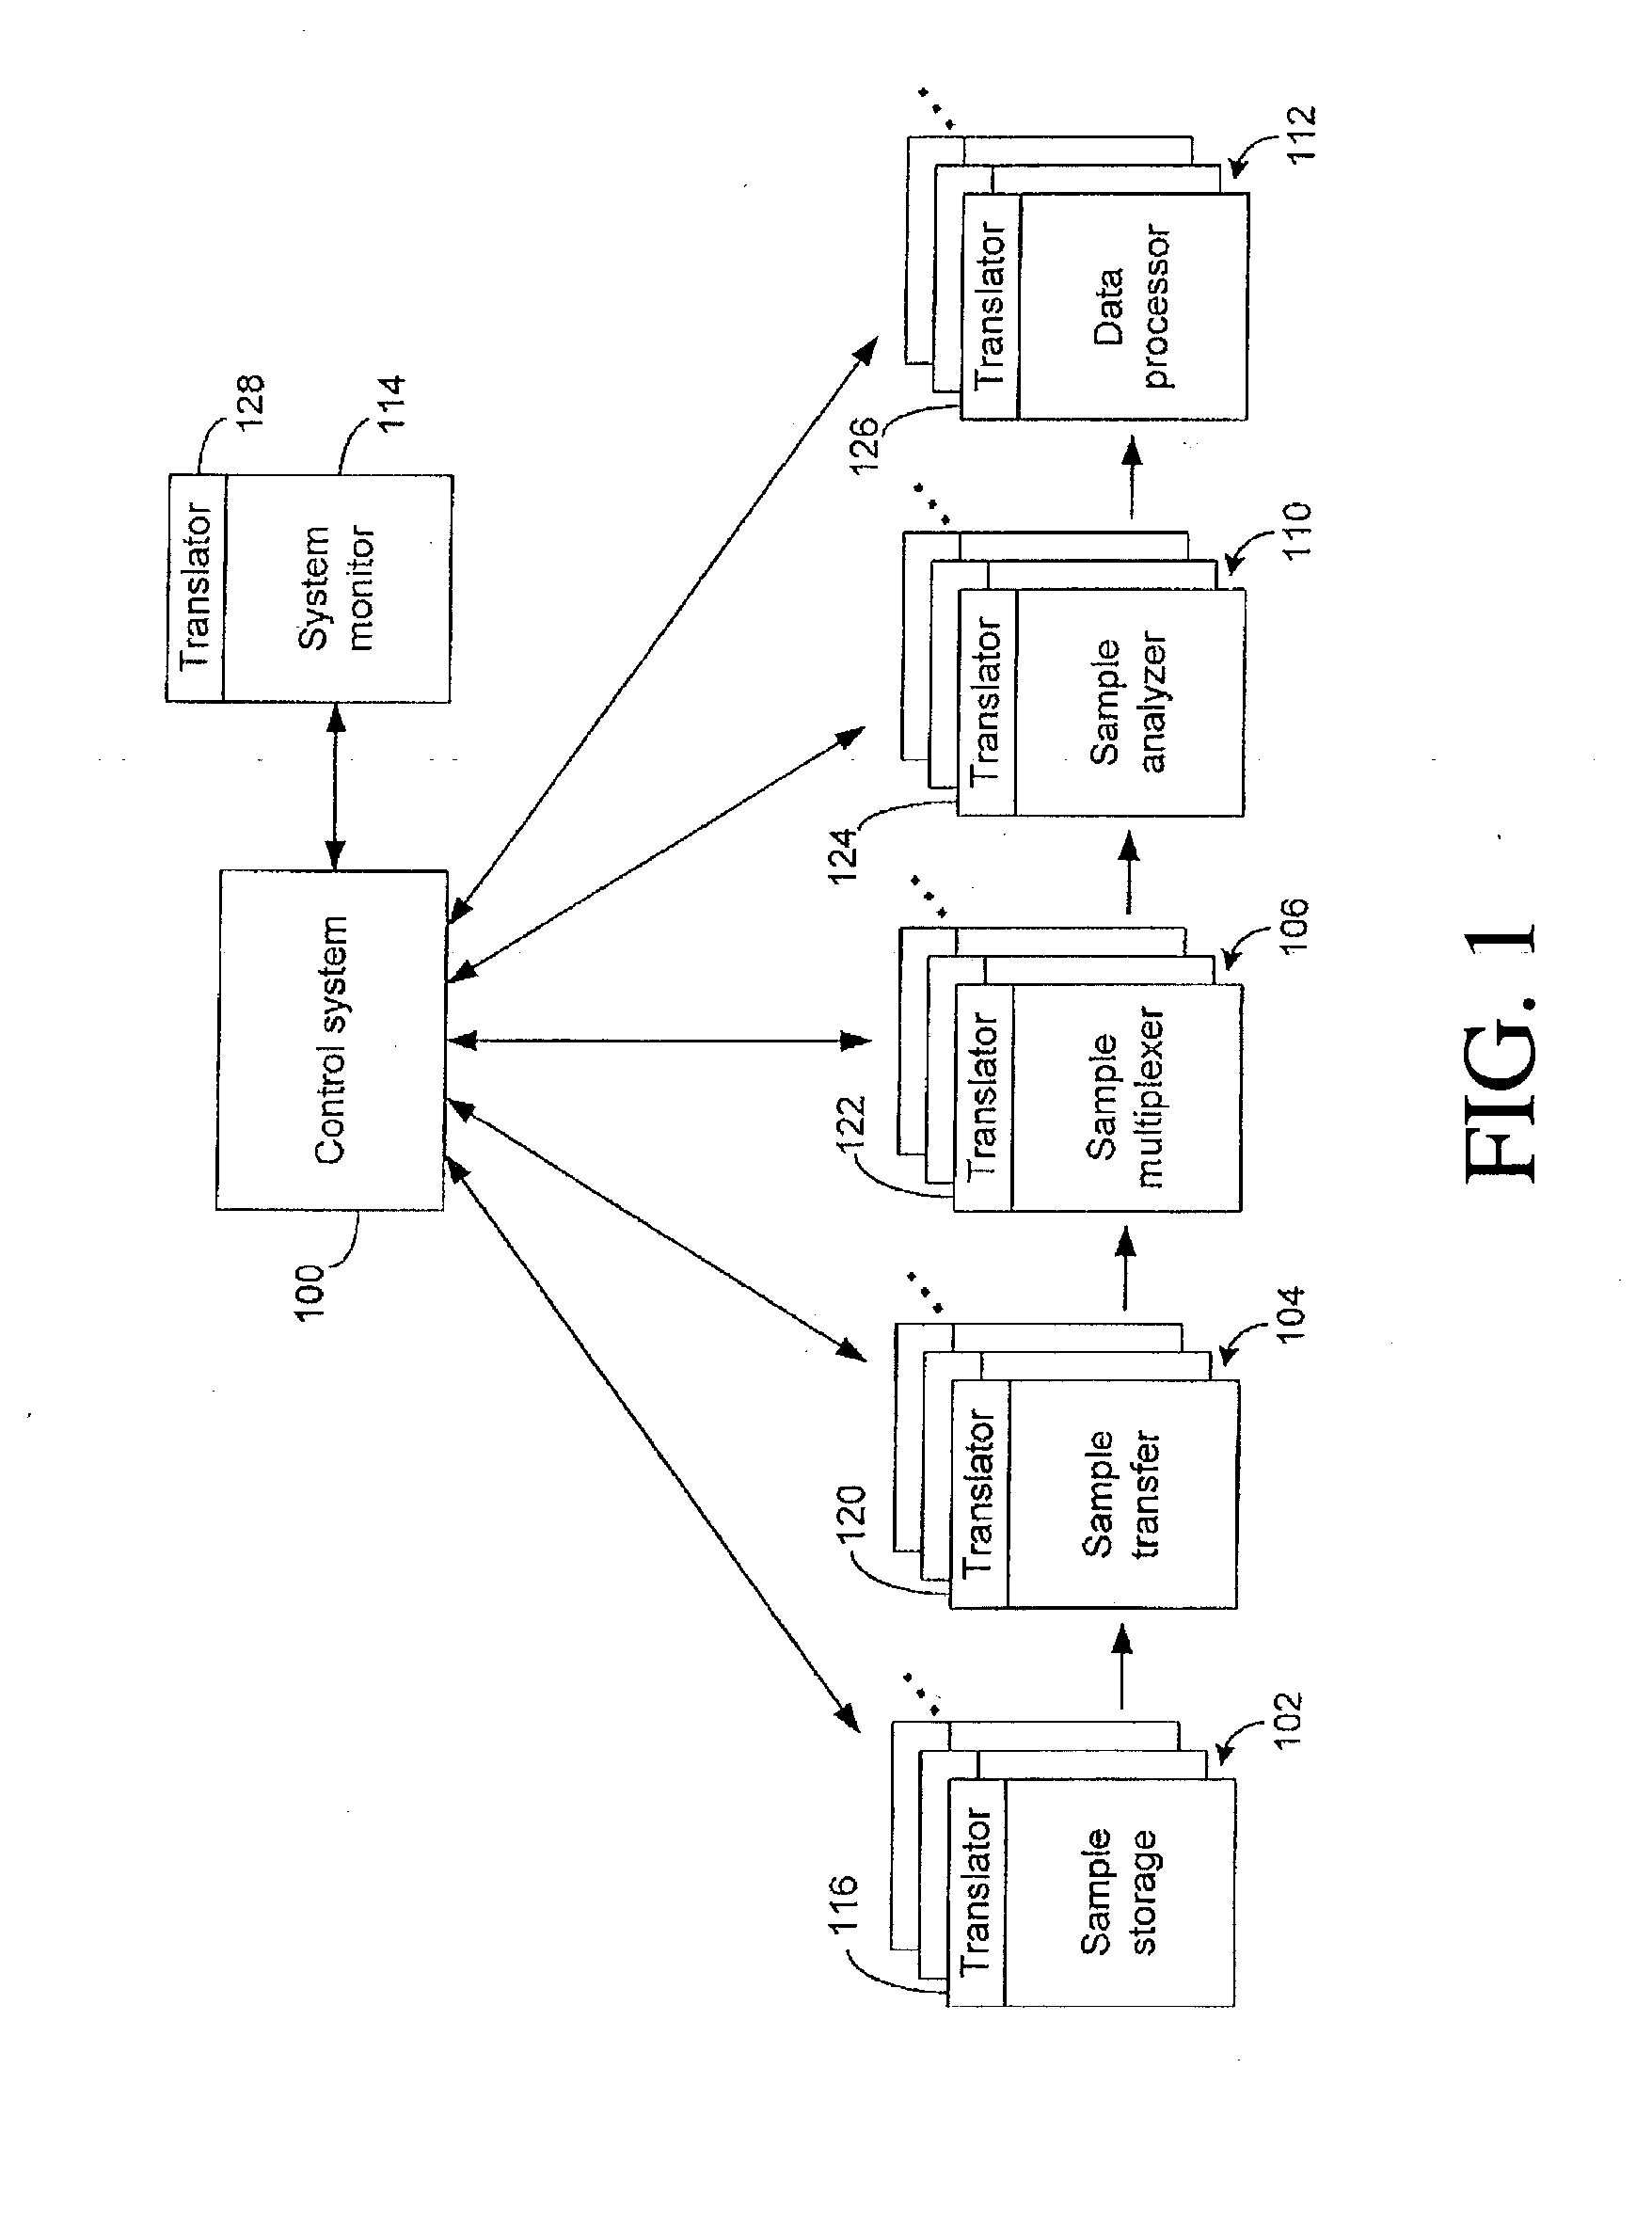 System and method for providing a standardized state interface for instrumentation